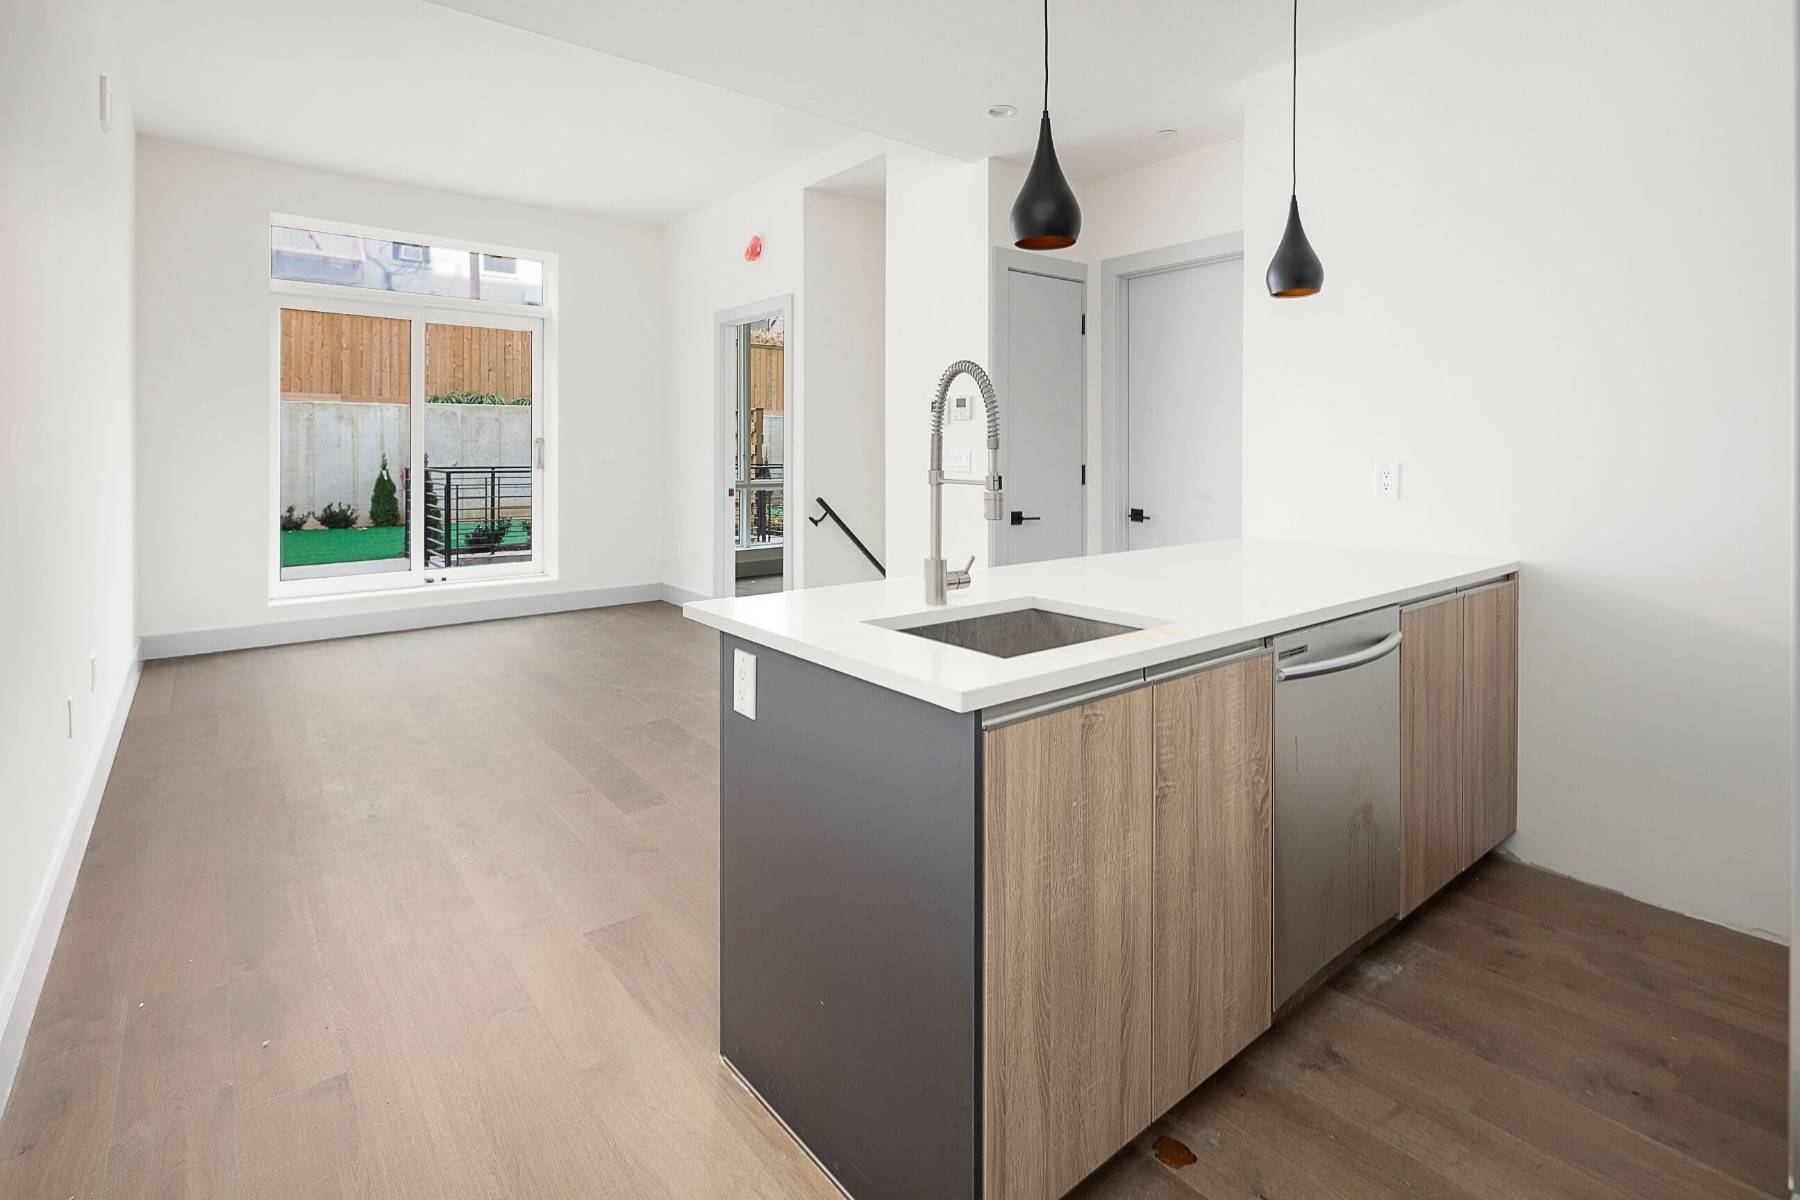 Upscale living in the heart of trendy, fashionable Brooklyn.